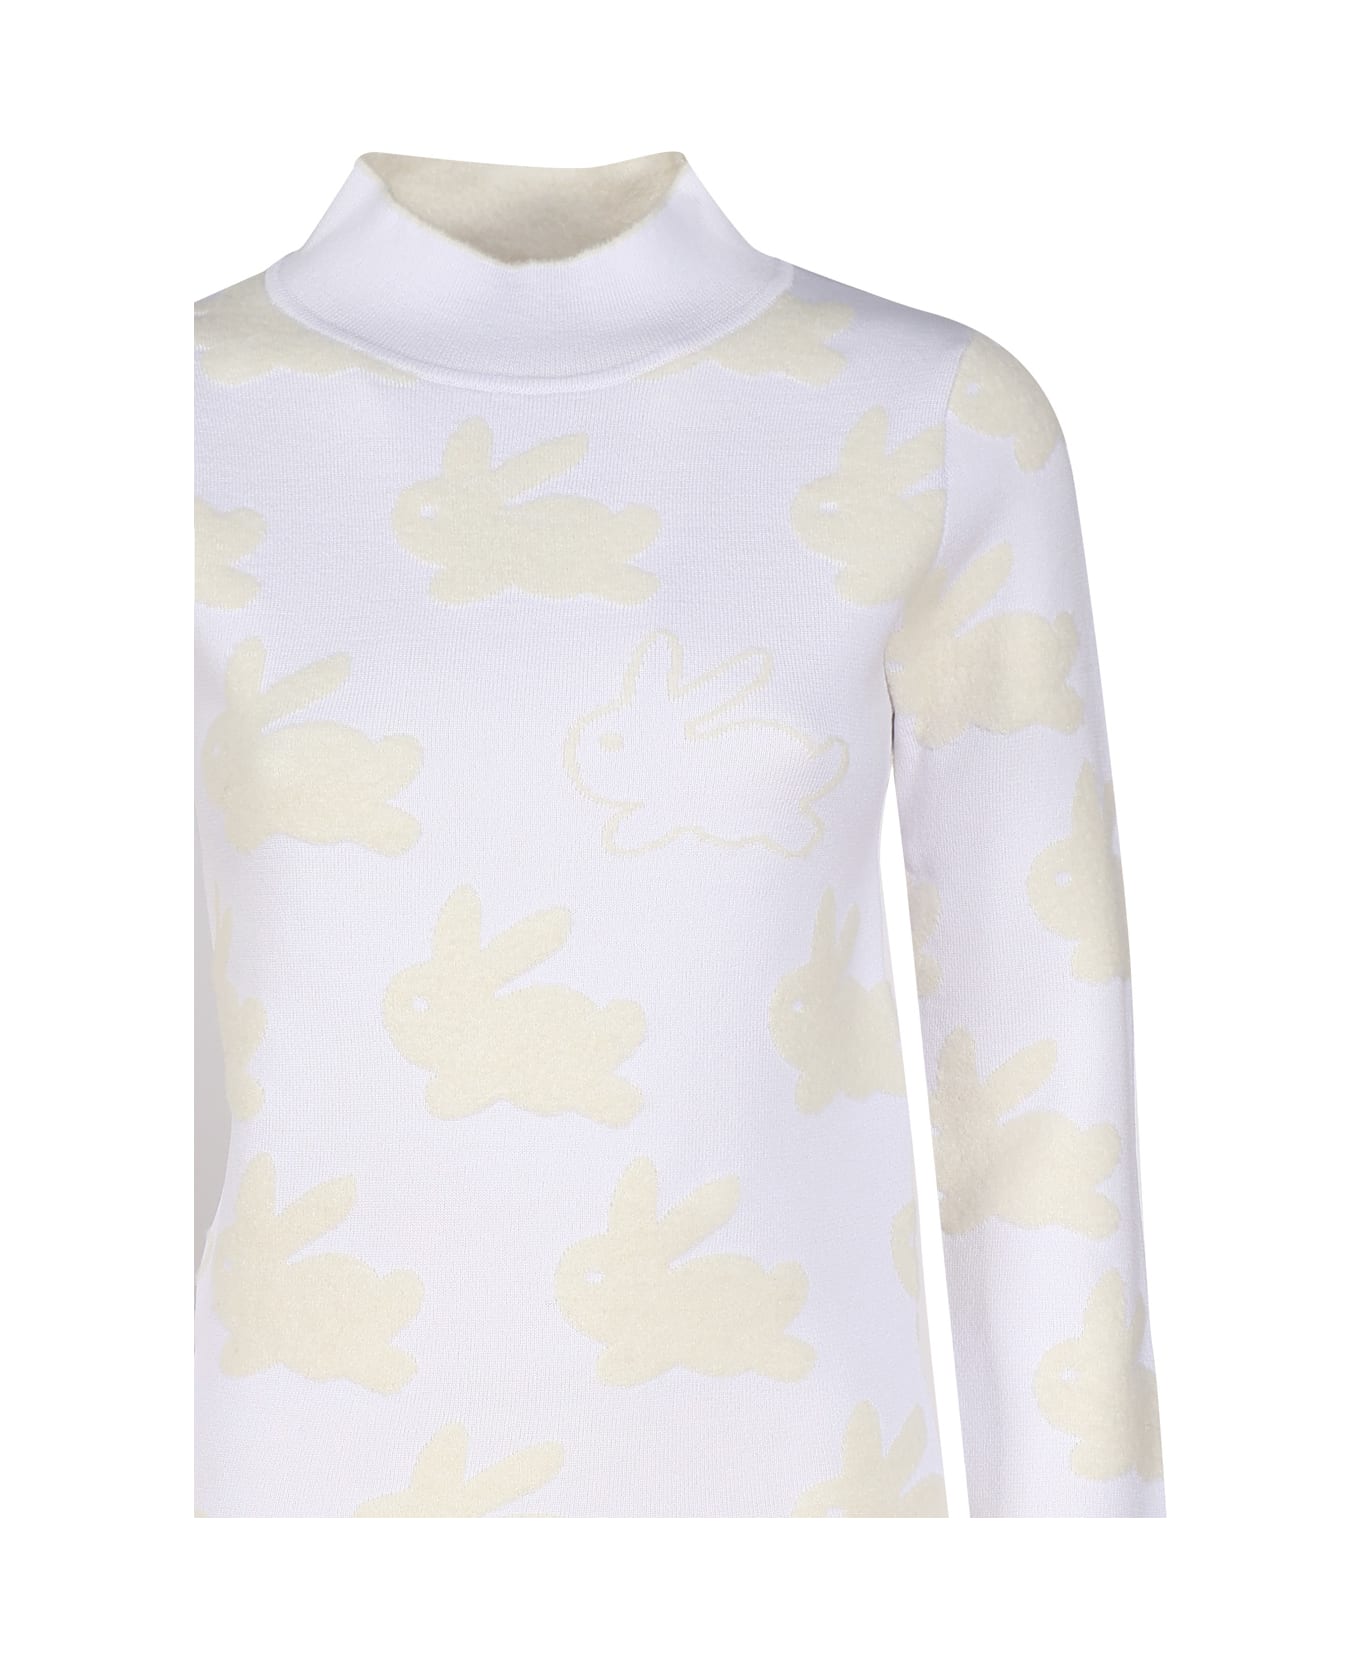 J.W. Anderson Embroidered Stretch Polyester Blend Sweater - WHITEIVORY